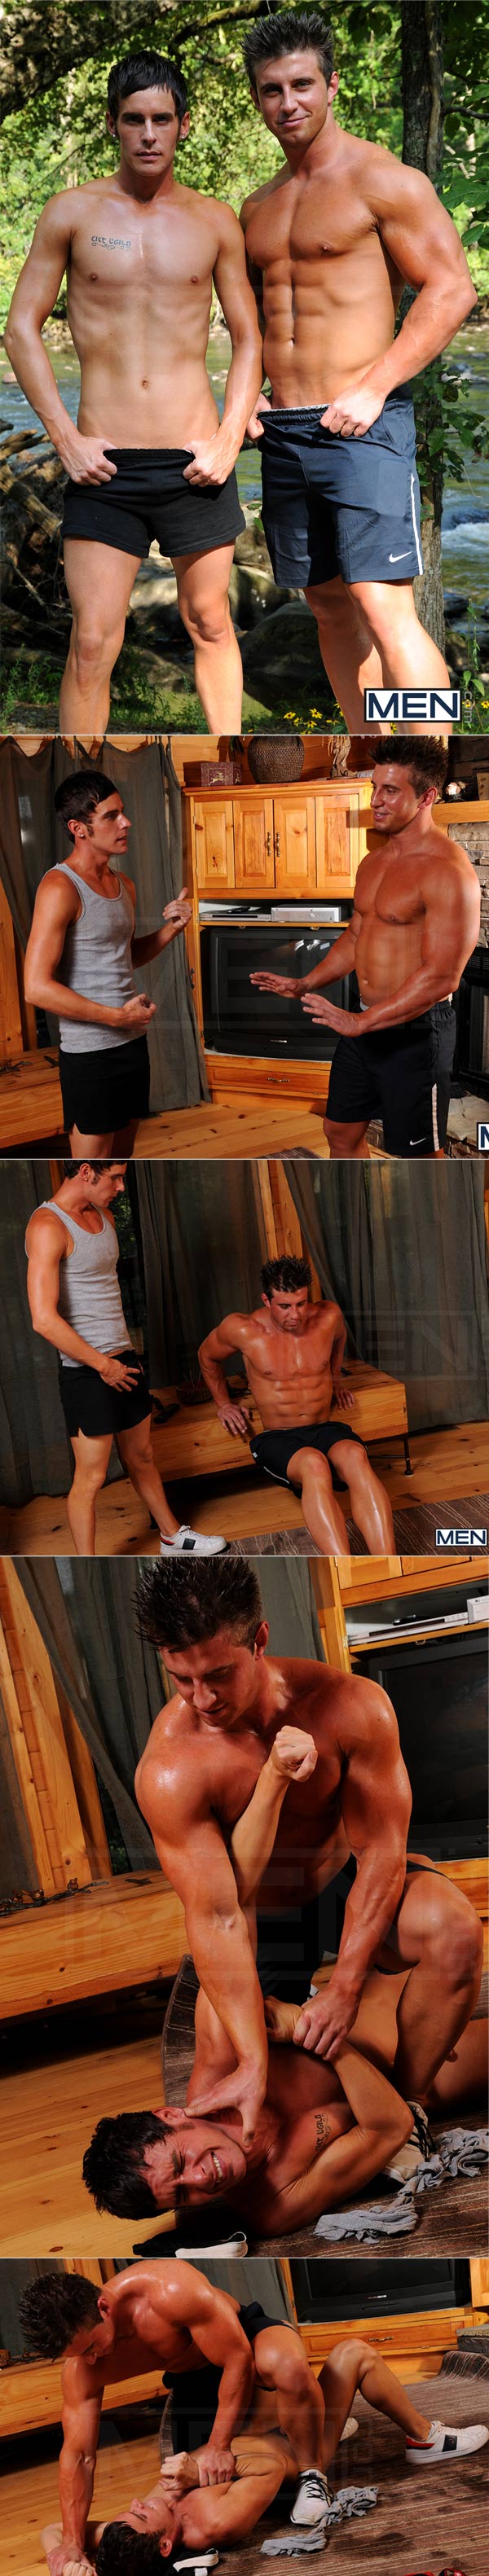 Personal Trainer (Tyr Alexander & Tyler St. James) at Drill My Hole